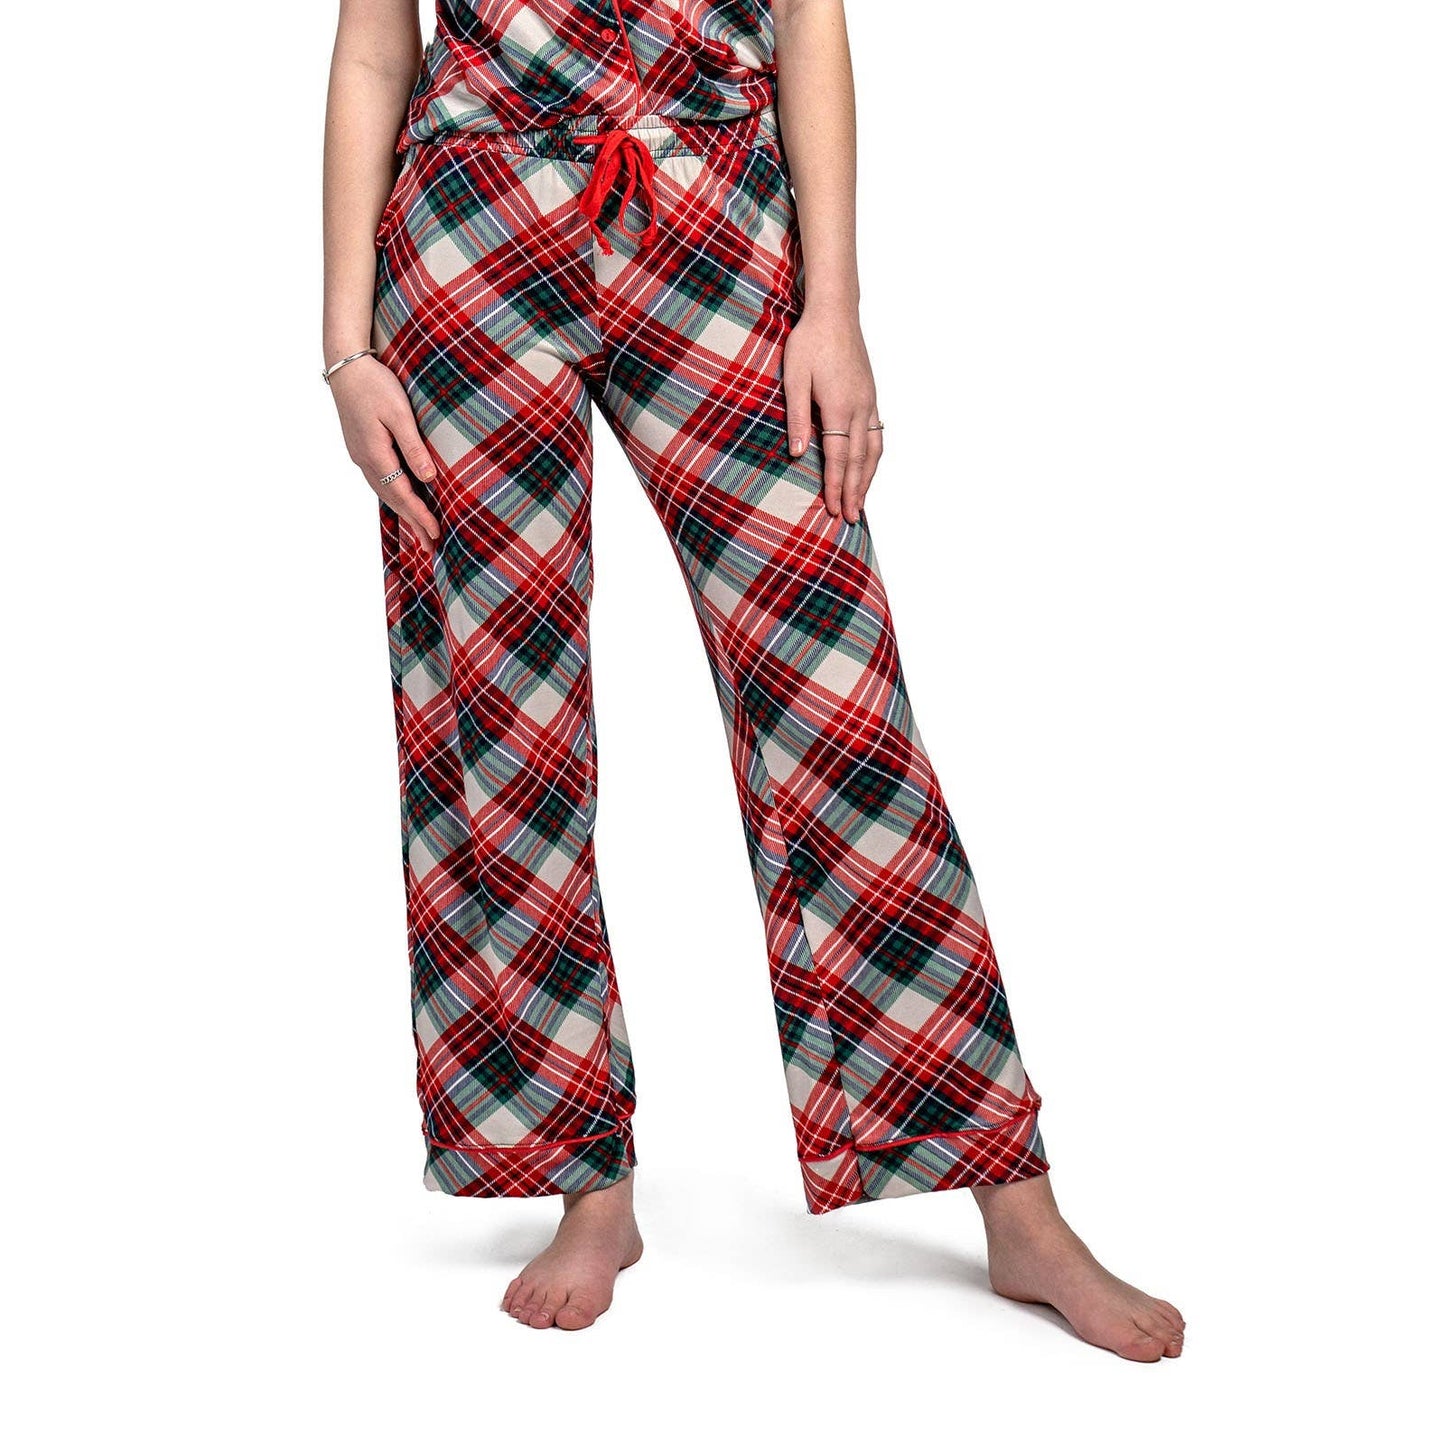 Hello Mello Soft Holiday Pajama Pants in Giftable Pouch - Prancer's Plaid